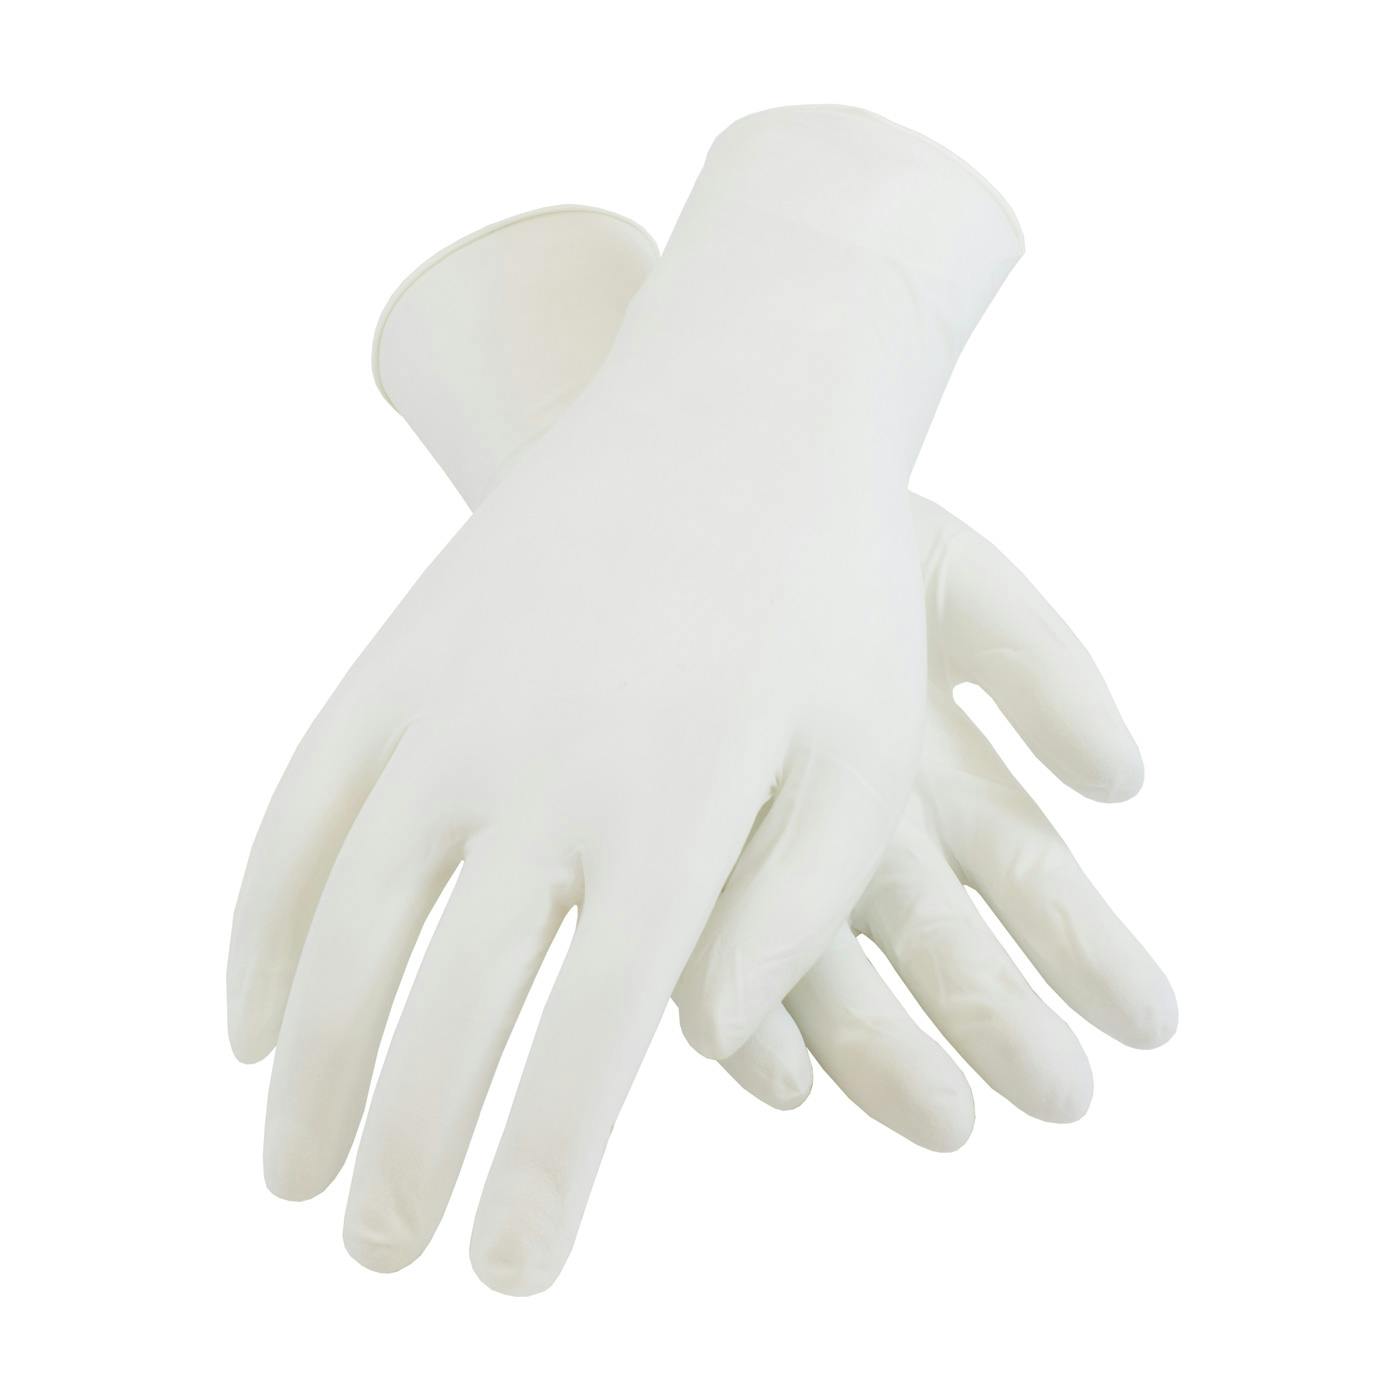 CleanTeam® Single Use Class 100 Cleanroom Nitrile Glove with Finger Textured Grip - 9.5" (100-332400)